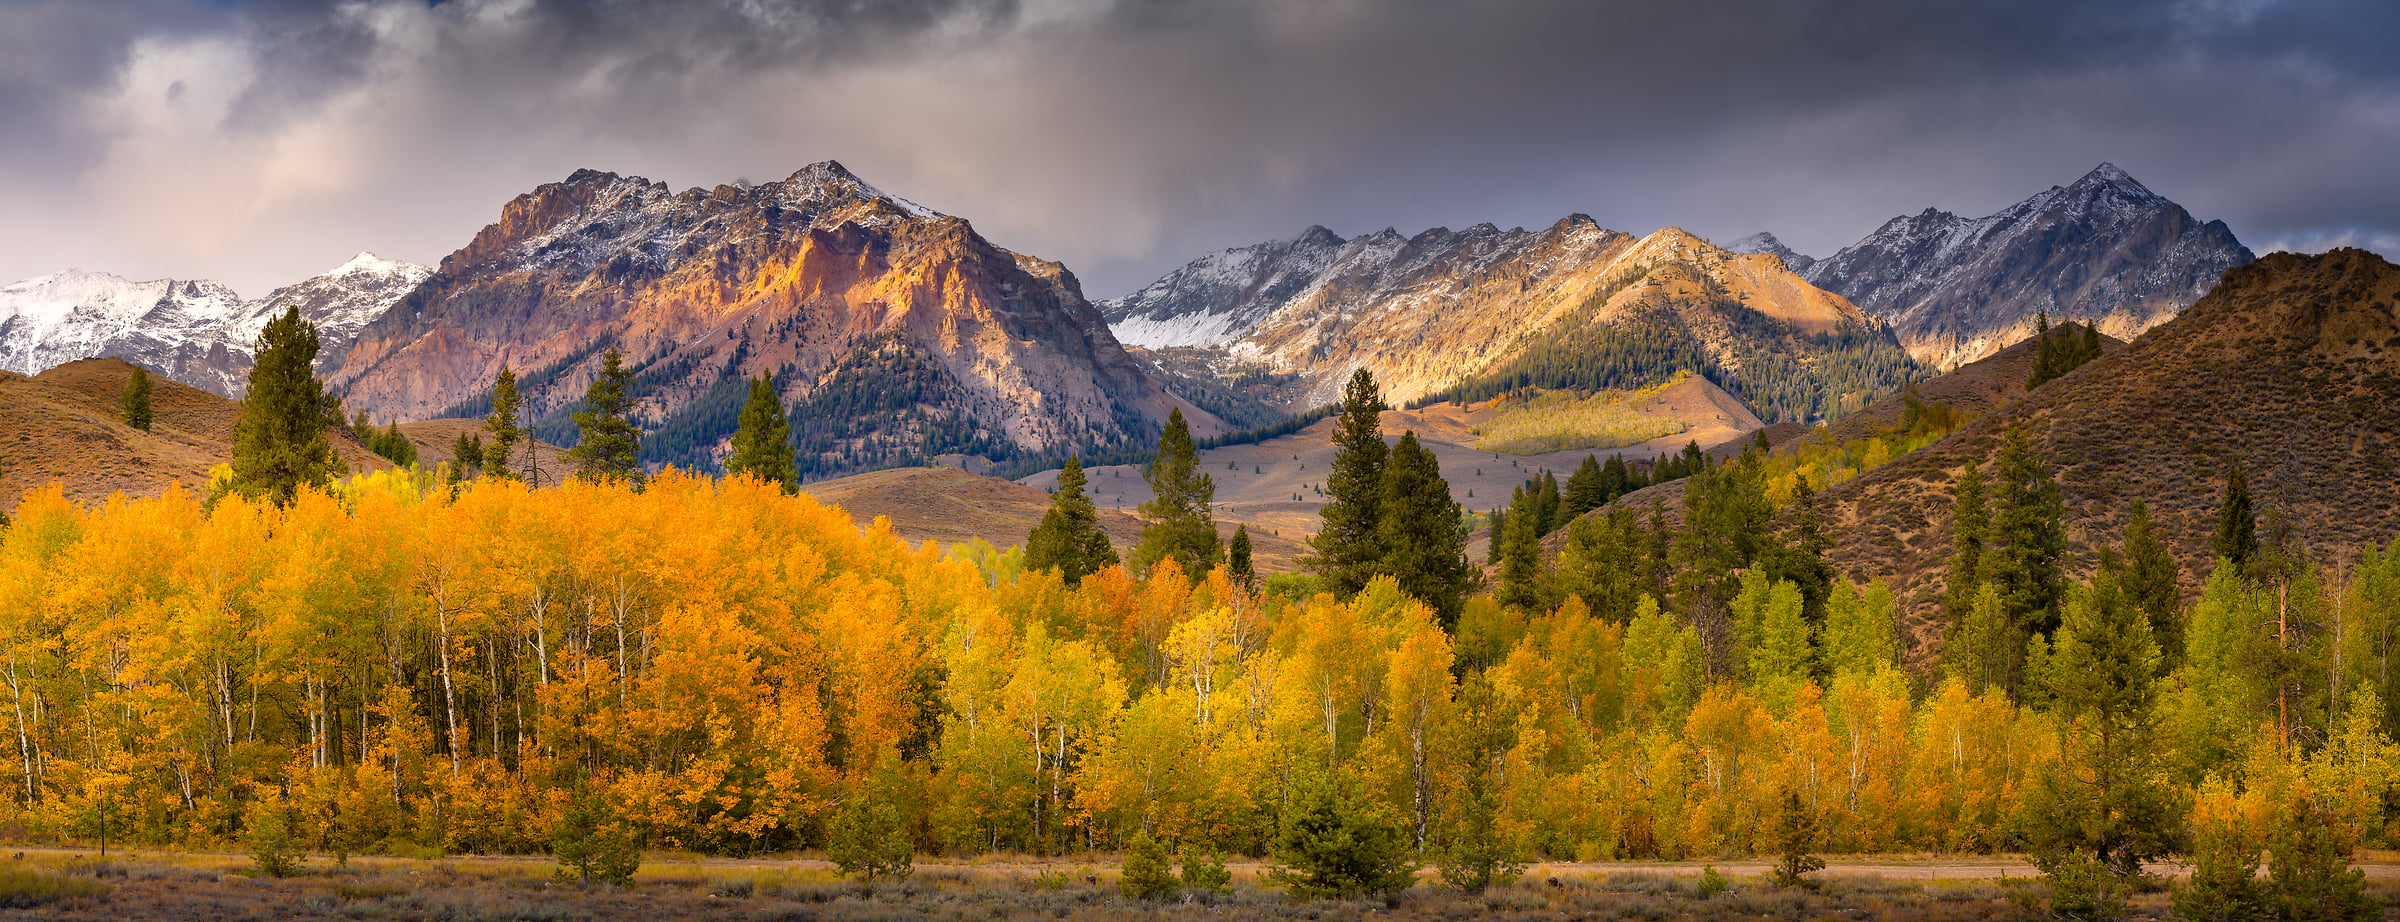 264 megapixels! A very high resolution, large-format VAST photo print of aspen trees in front of a mountain range in autumn; landscape photograph created by Jeff Lewis in Ketchum, Idaho